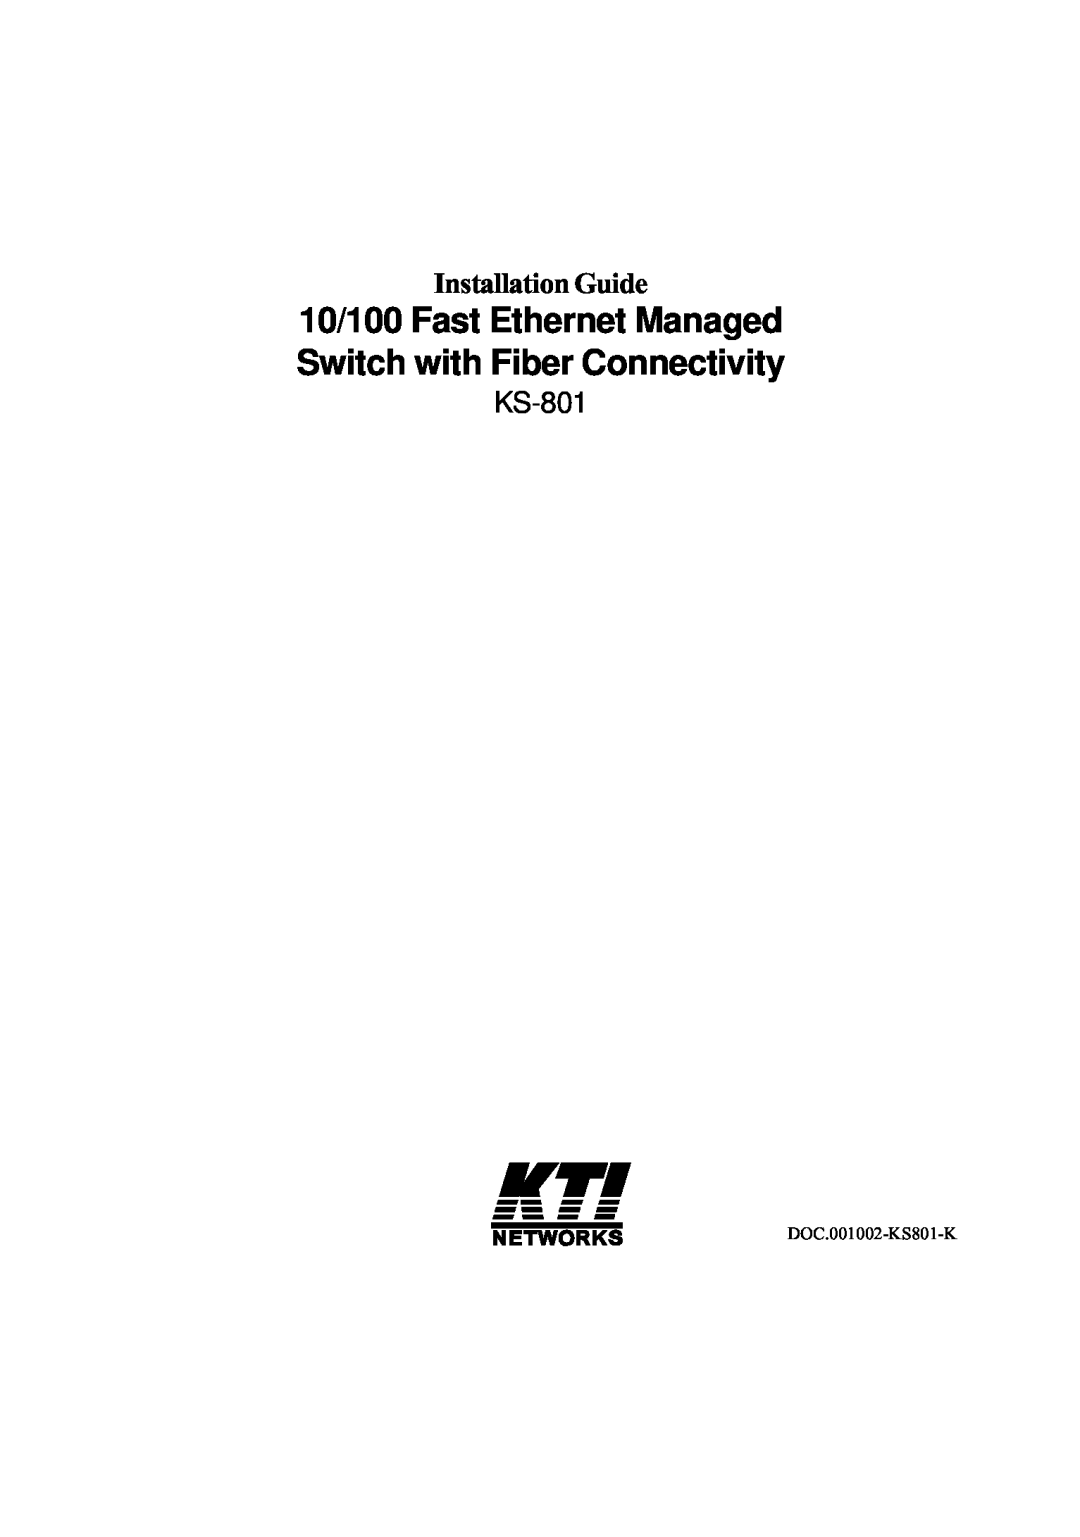 KTI Networks KS-801 manual 10/100 Fast Ethernet Managed Switch with Fiber Connectivity, Installation Guide 